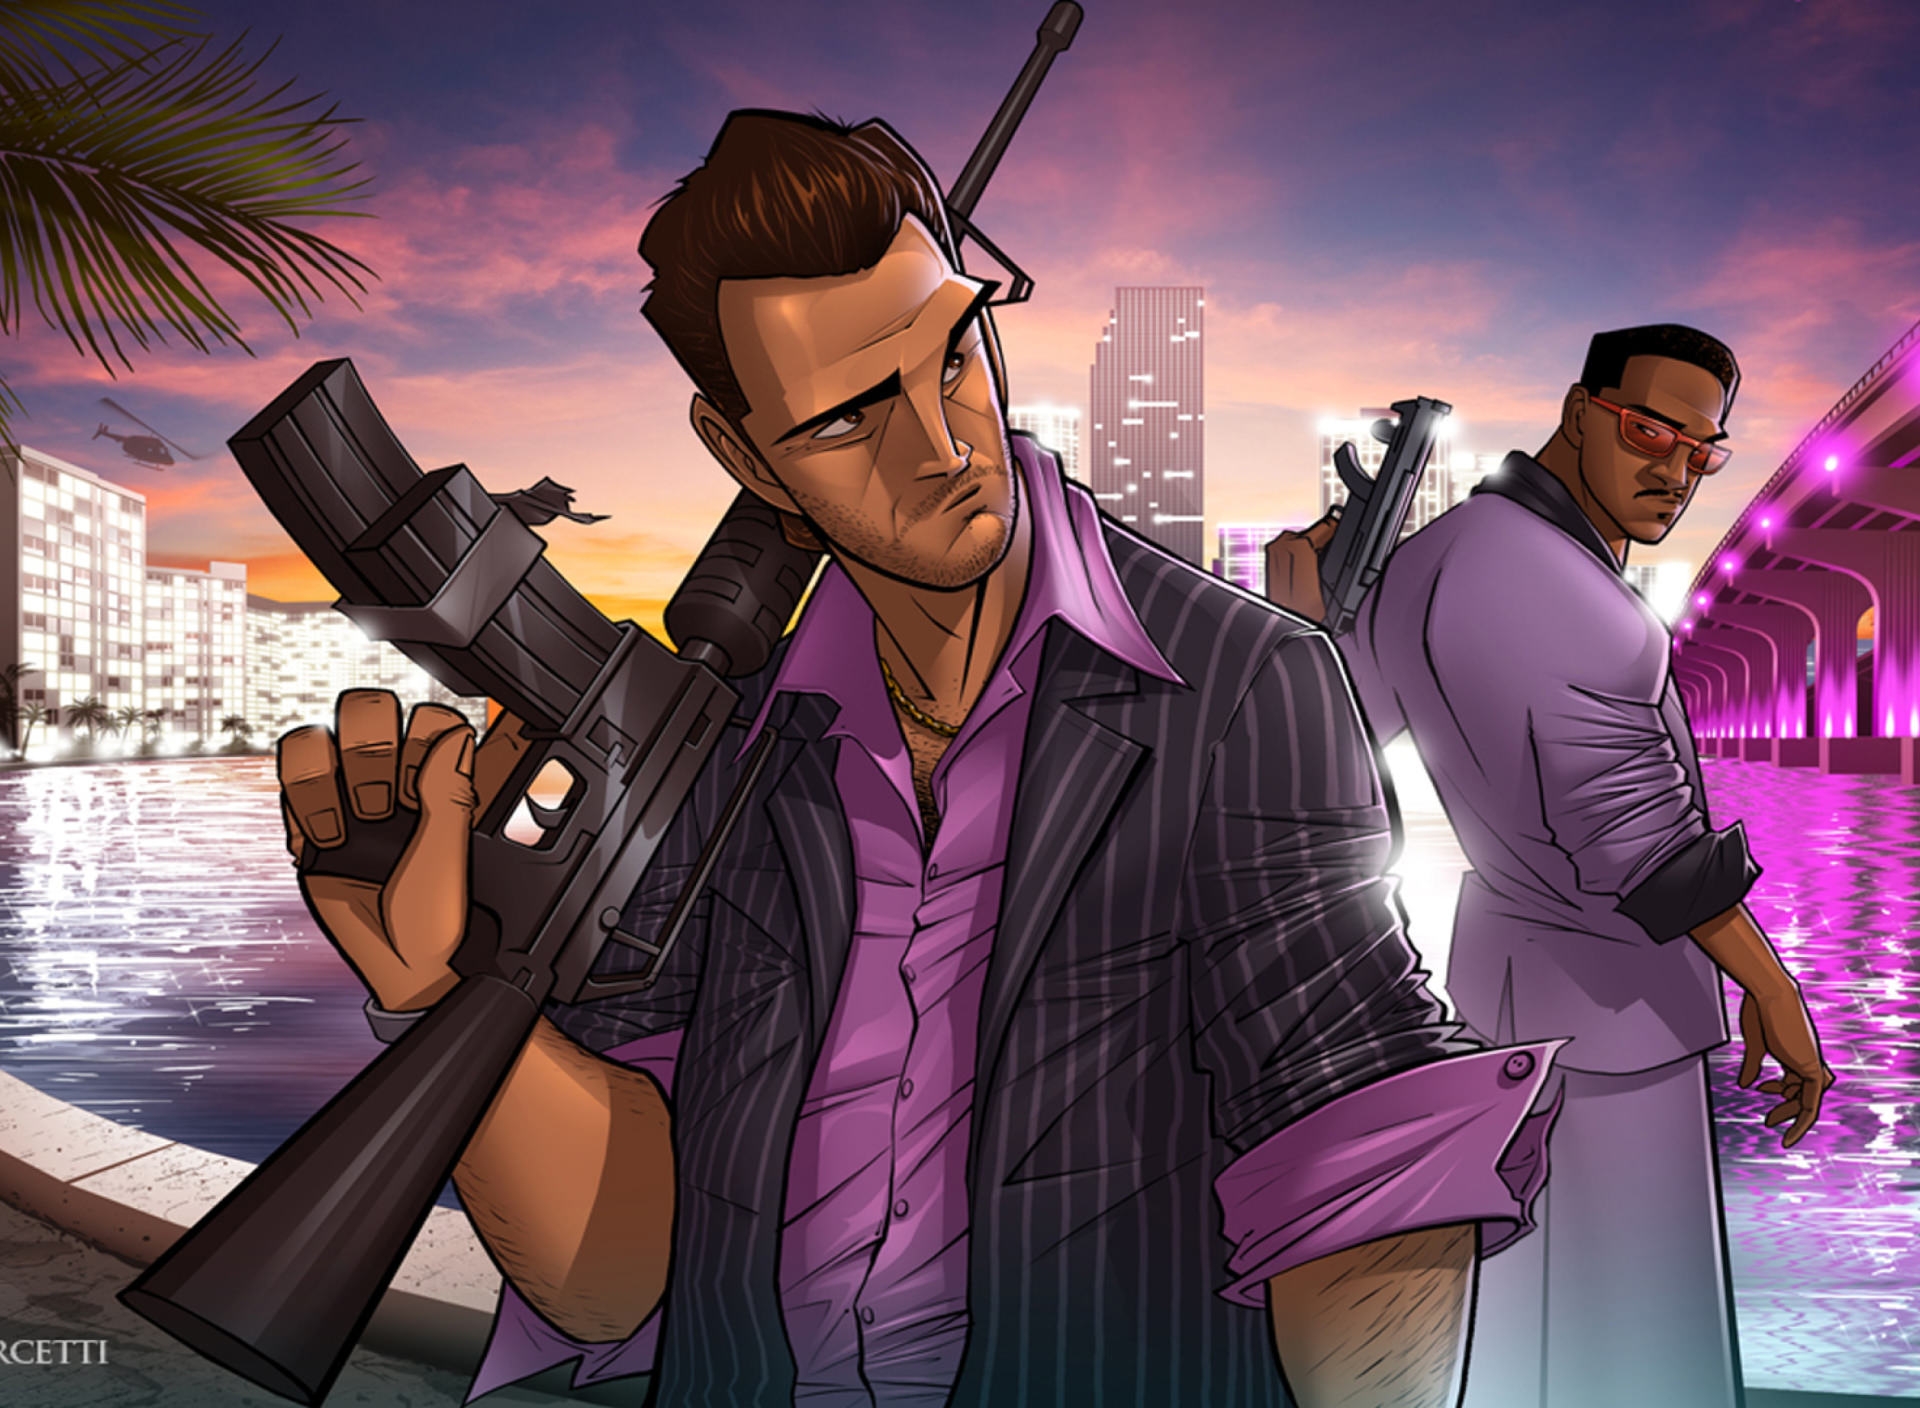 gta vice city wallpaper hd,pc game,games,movie,illustration,fictional character